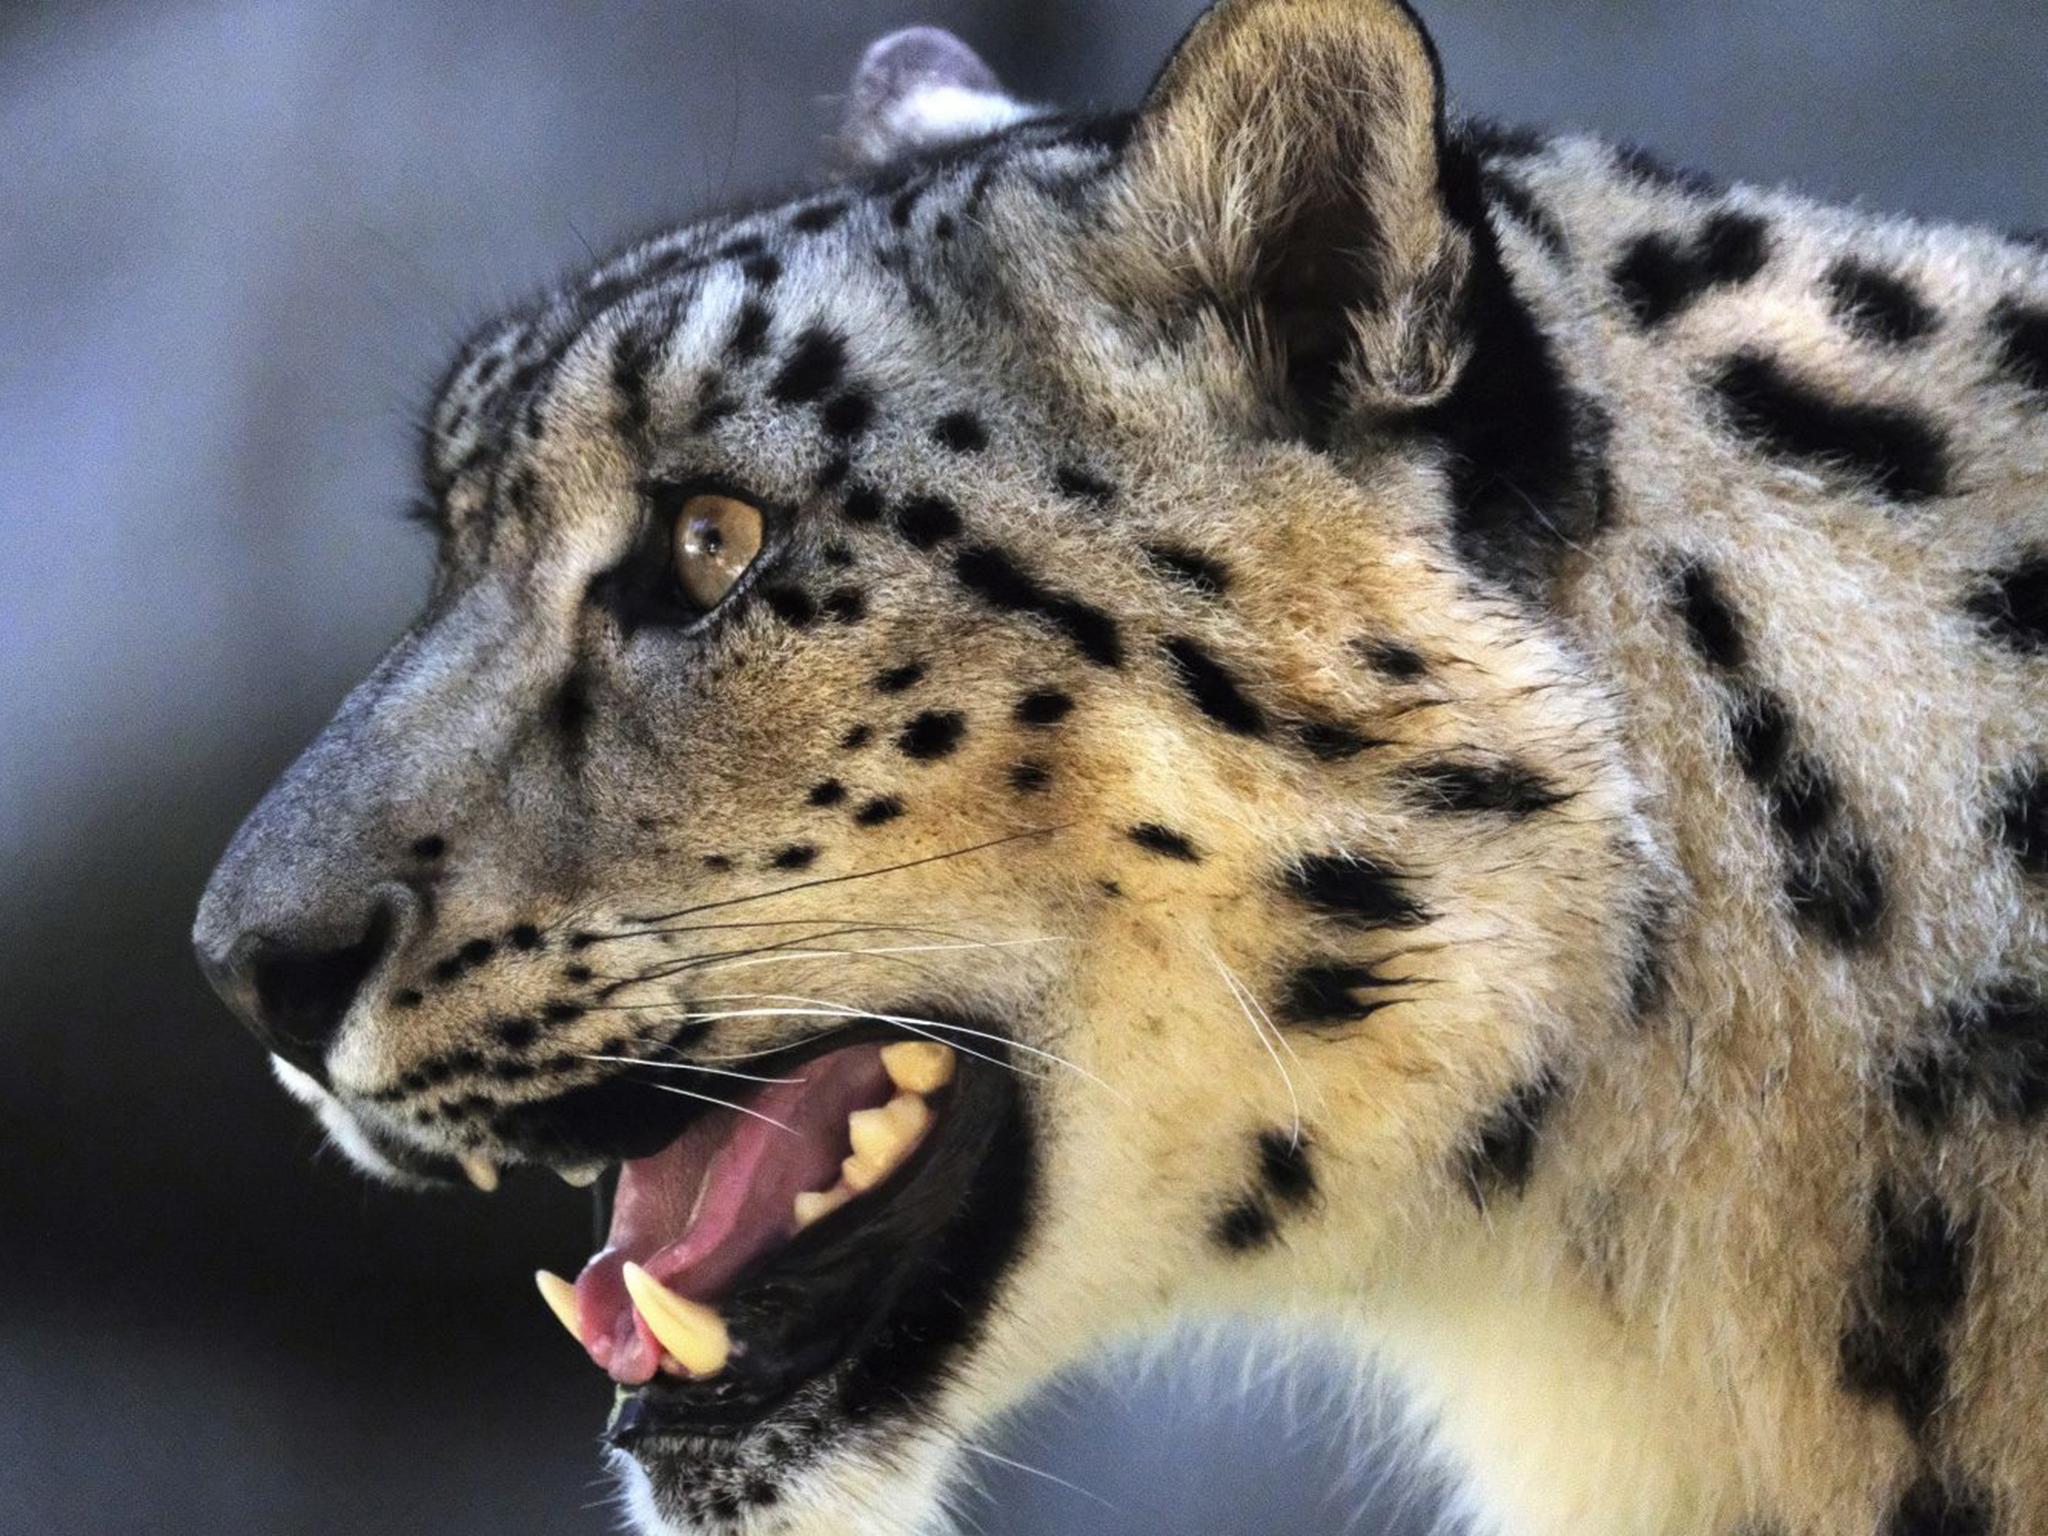 Snow leopards are now vulnerable instead of endangered